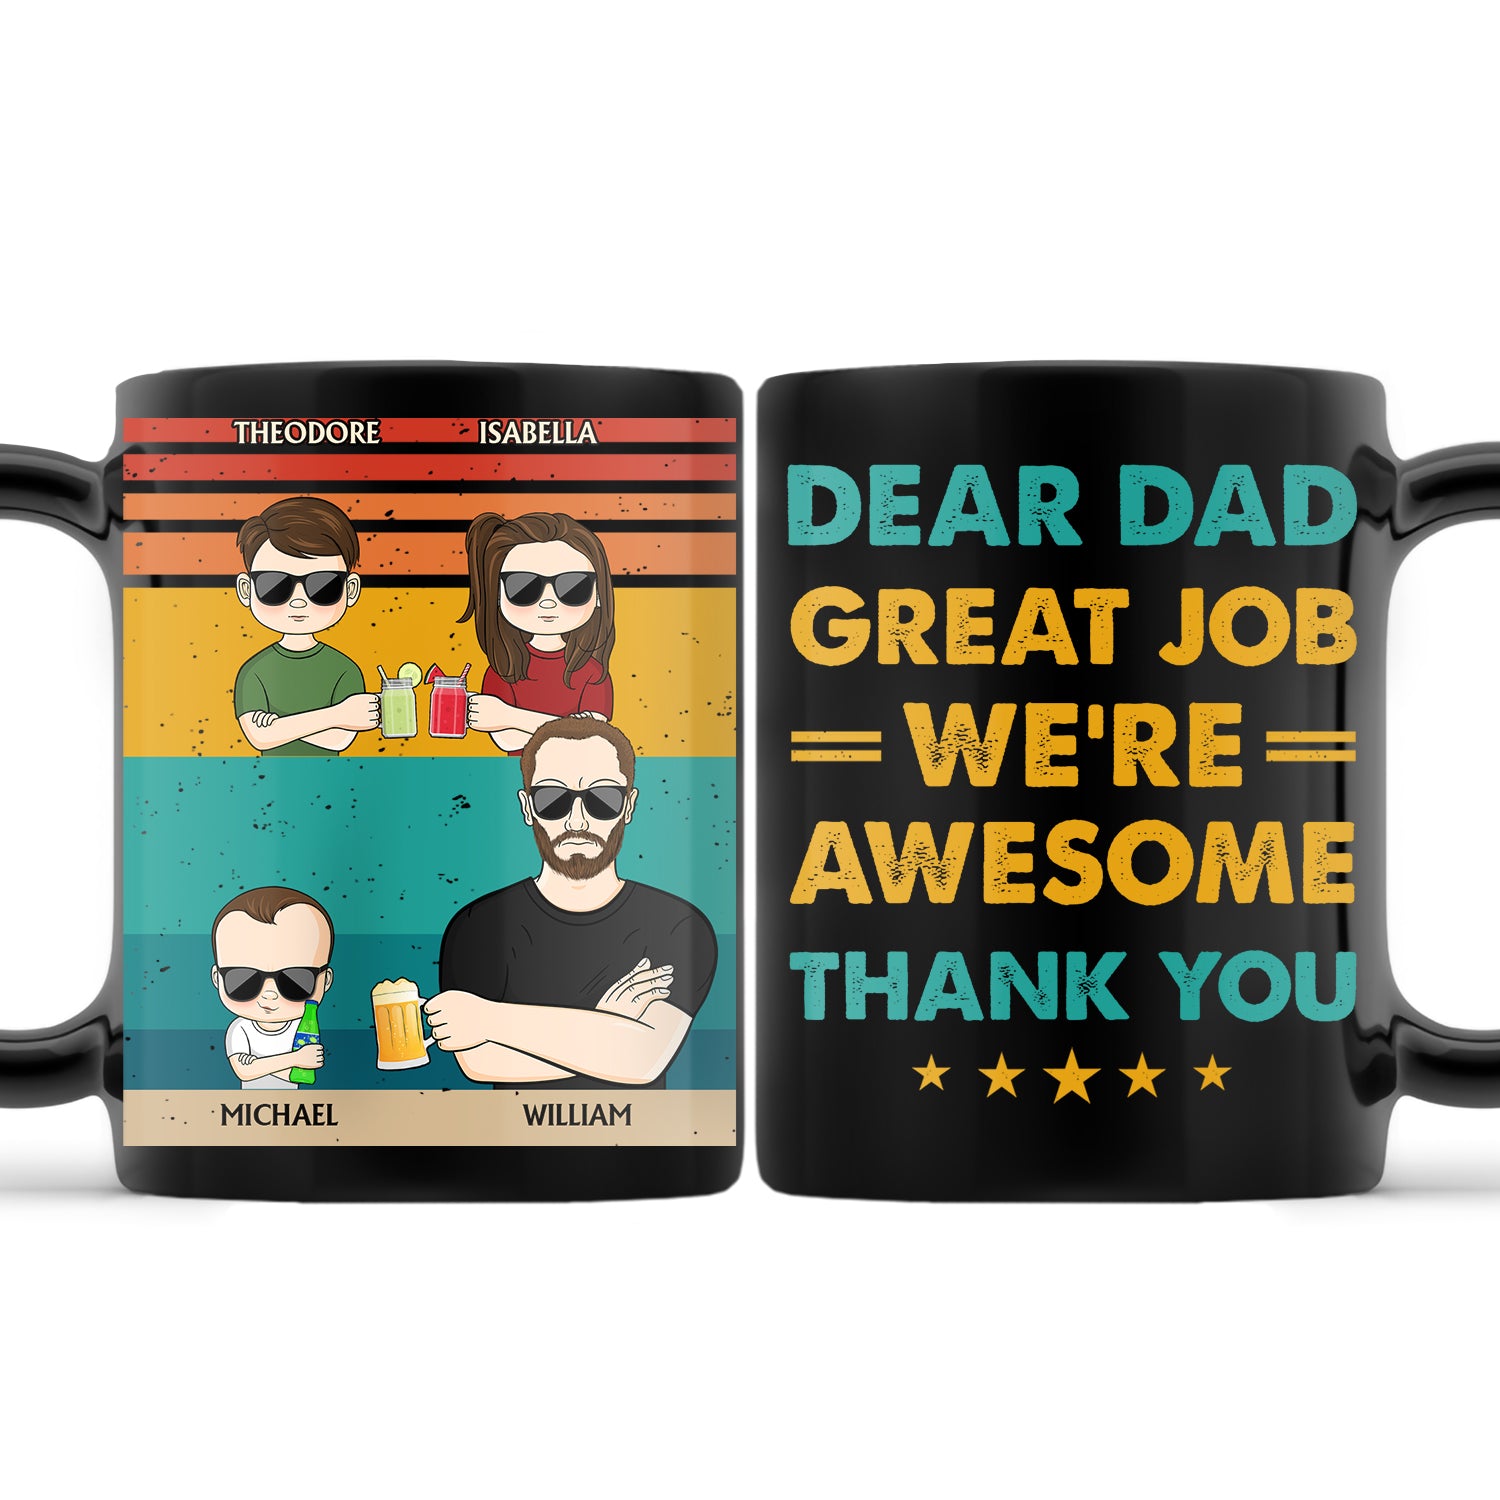 Dear Dad Great Job We're Awesome Thank You - Funny, Birthday Gift For Father, Husband - Personalized Custom Black Mug